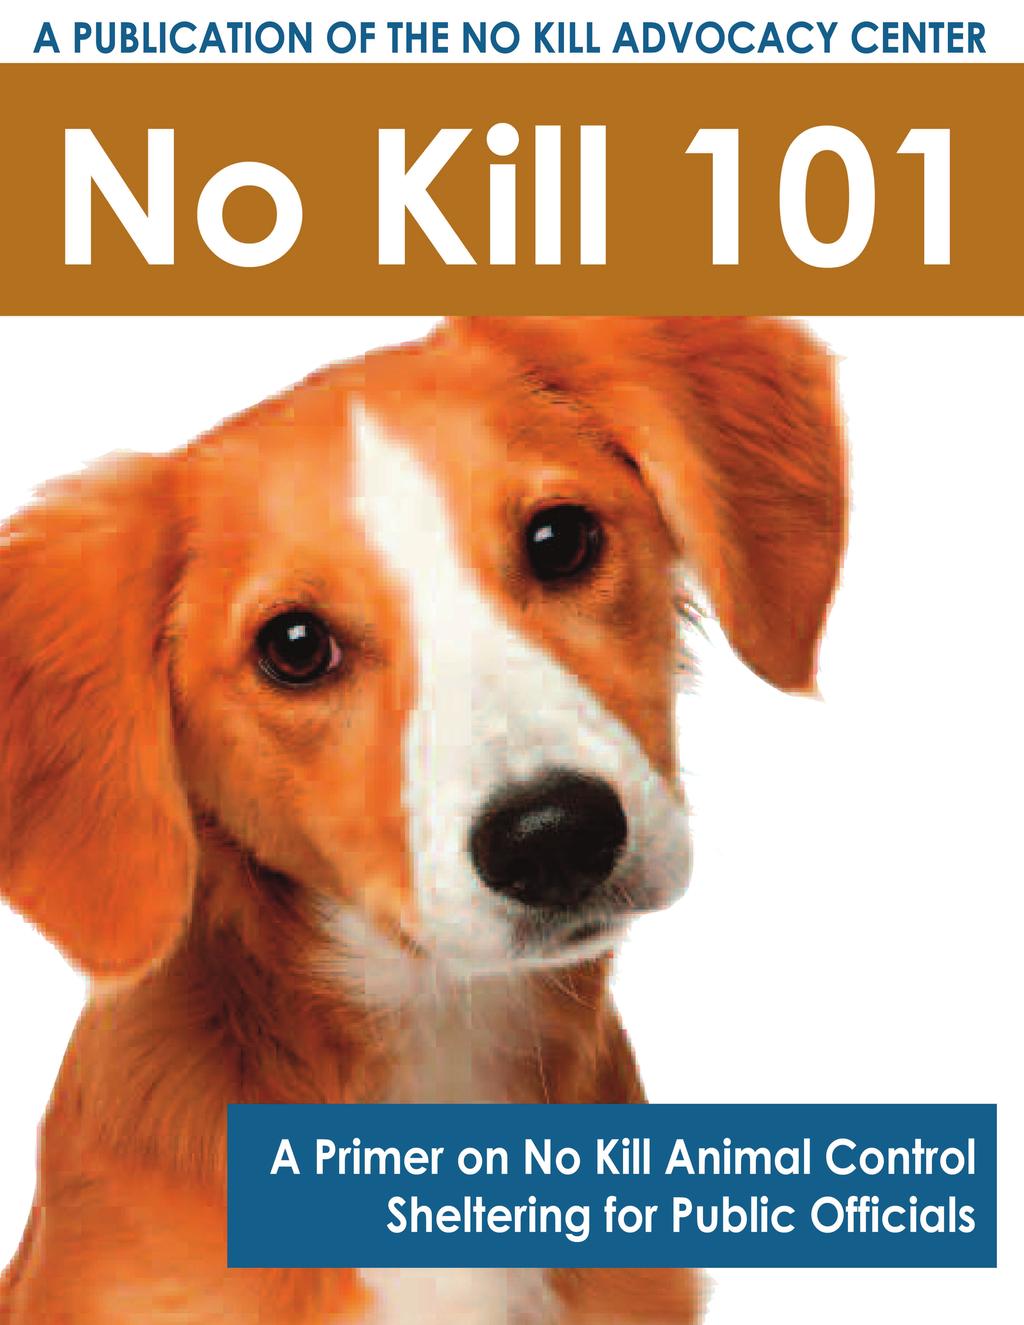 if every animal shelter in the United States embraced the No Kill philosophy and the